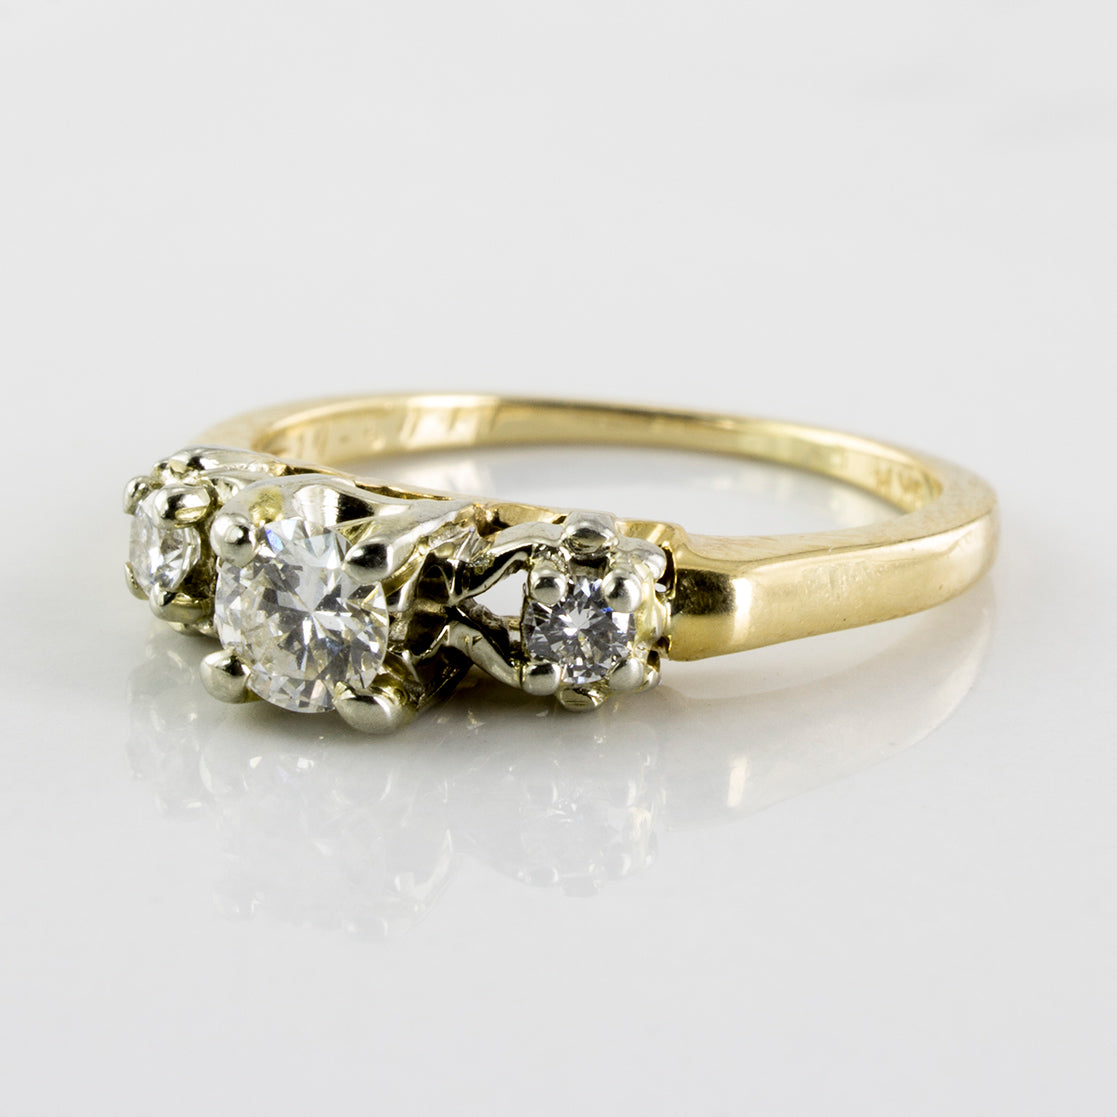 Early 1960's Three Stone Engagement Ring | 0.35 ctw | SZ 4.25 |